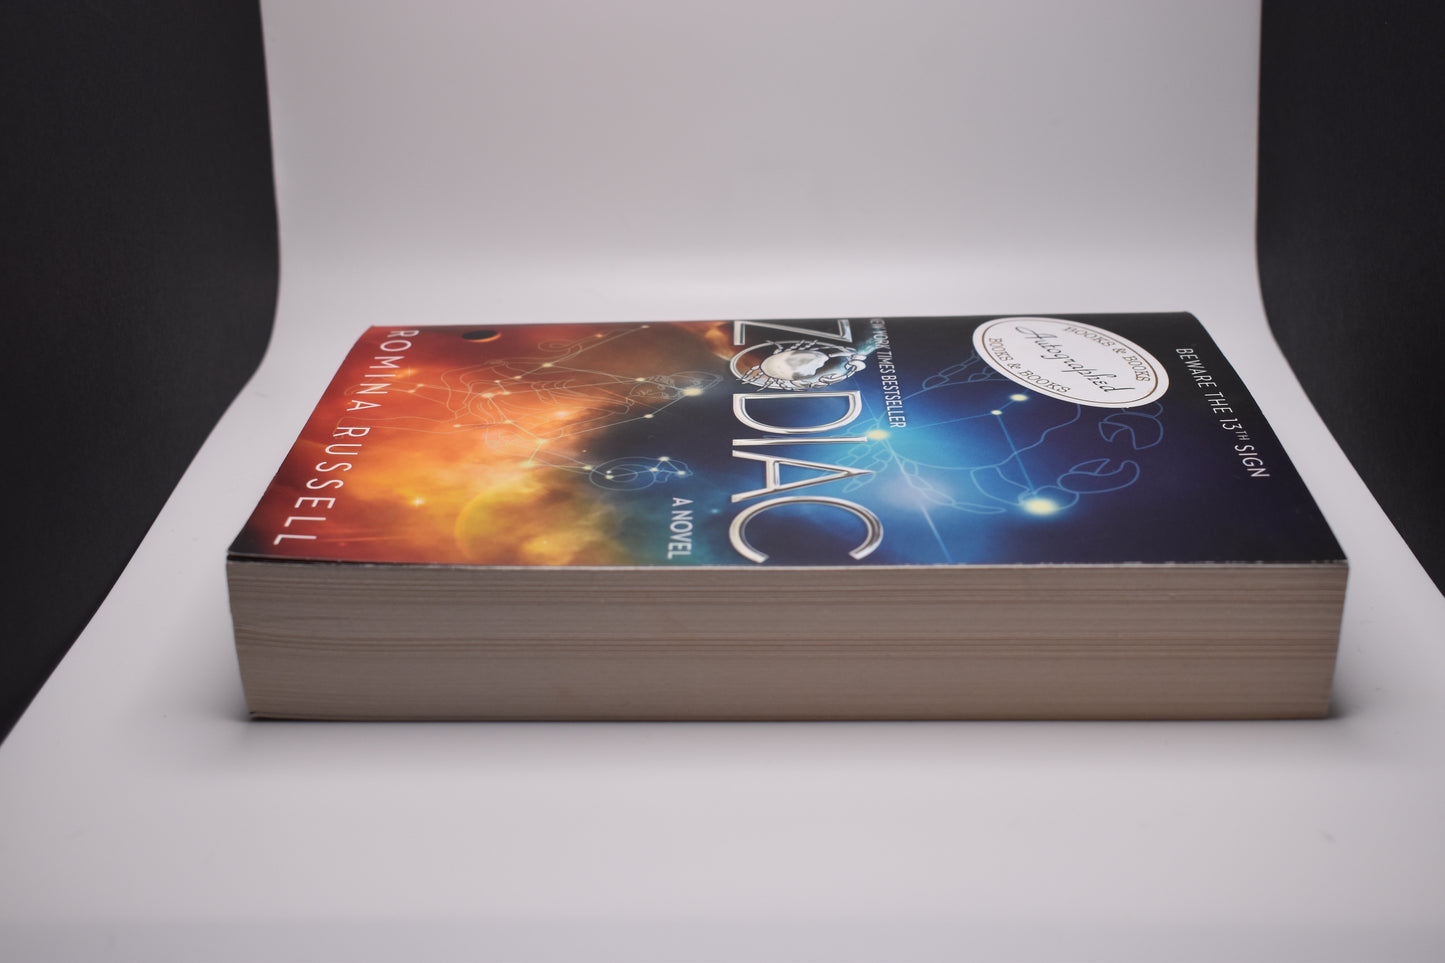 Zodiac by Romina Russell - Zodiac #1 - Books and Books Edition Signed (Paperback)